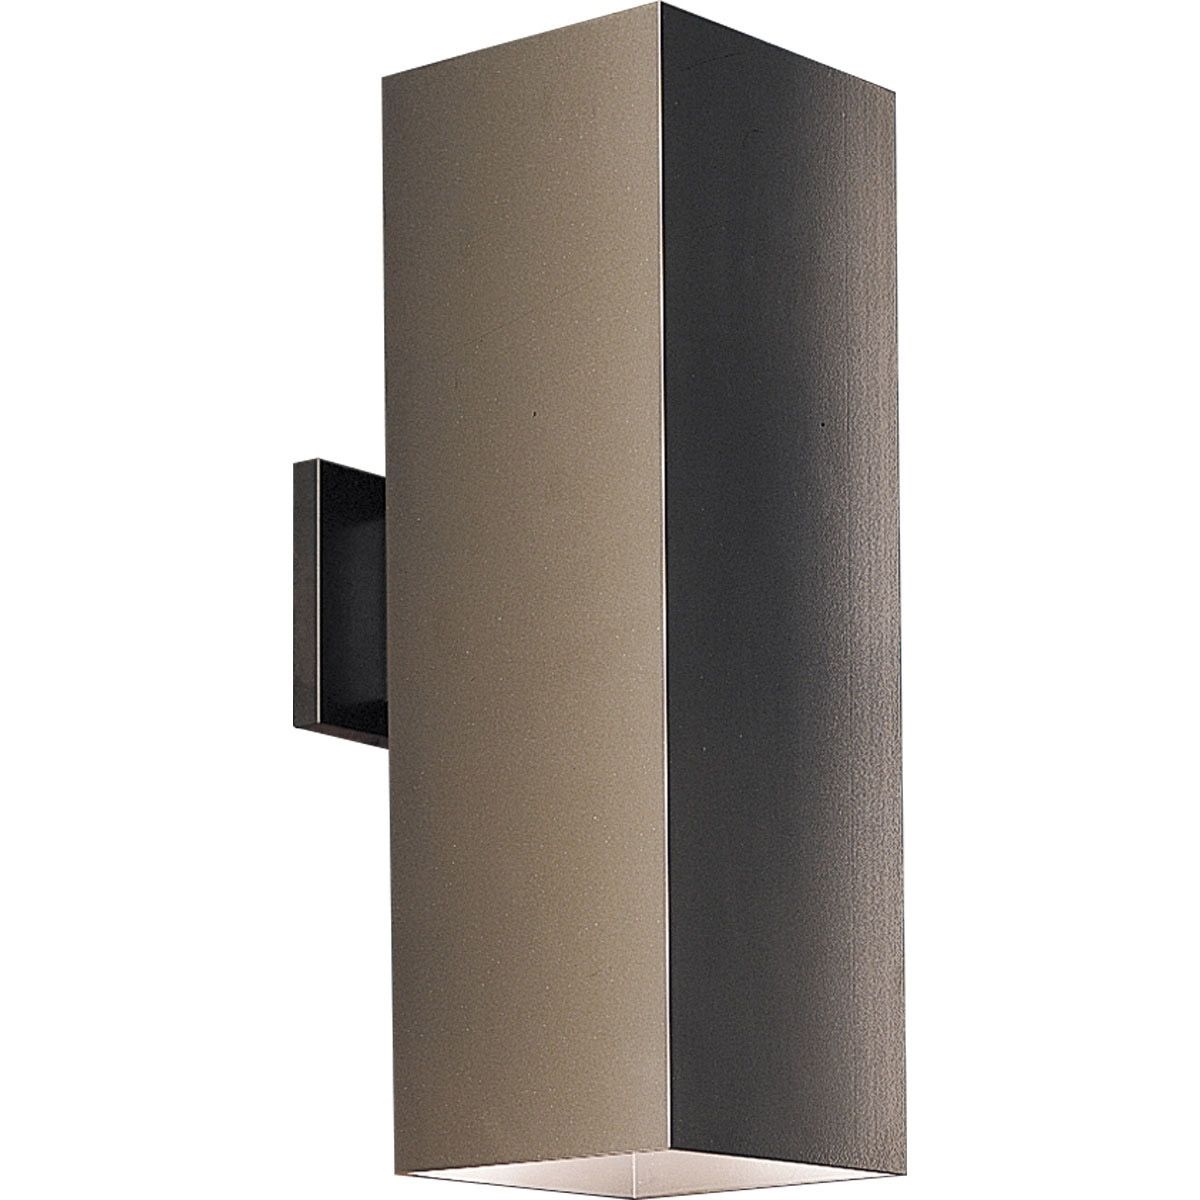 Lighting P5644 20 Square Outdoor Wall Mount Fixture With Regard To Outdoor Wall Lighting Fixtures (View 2 of 15)